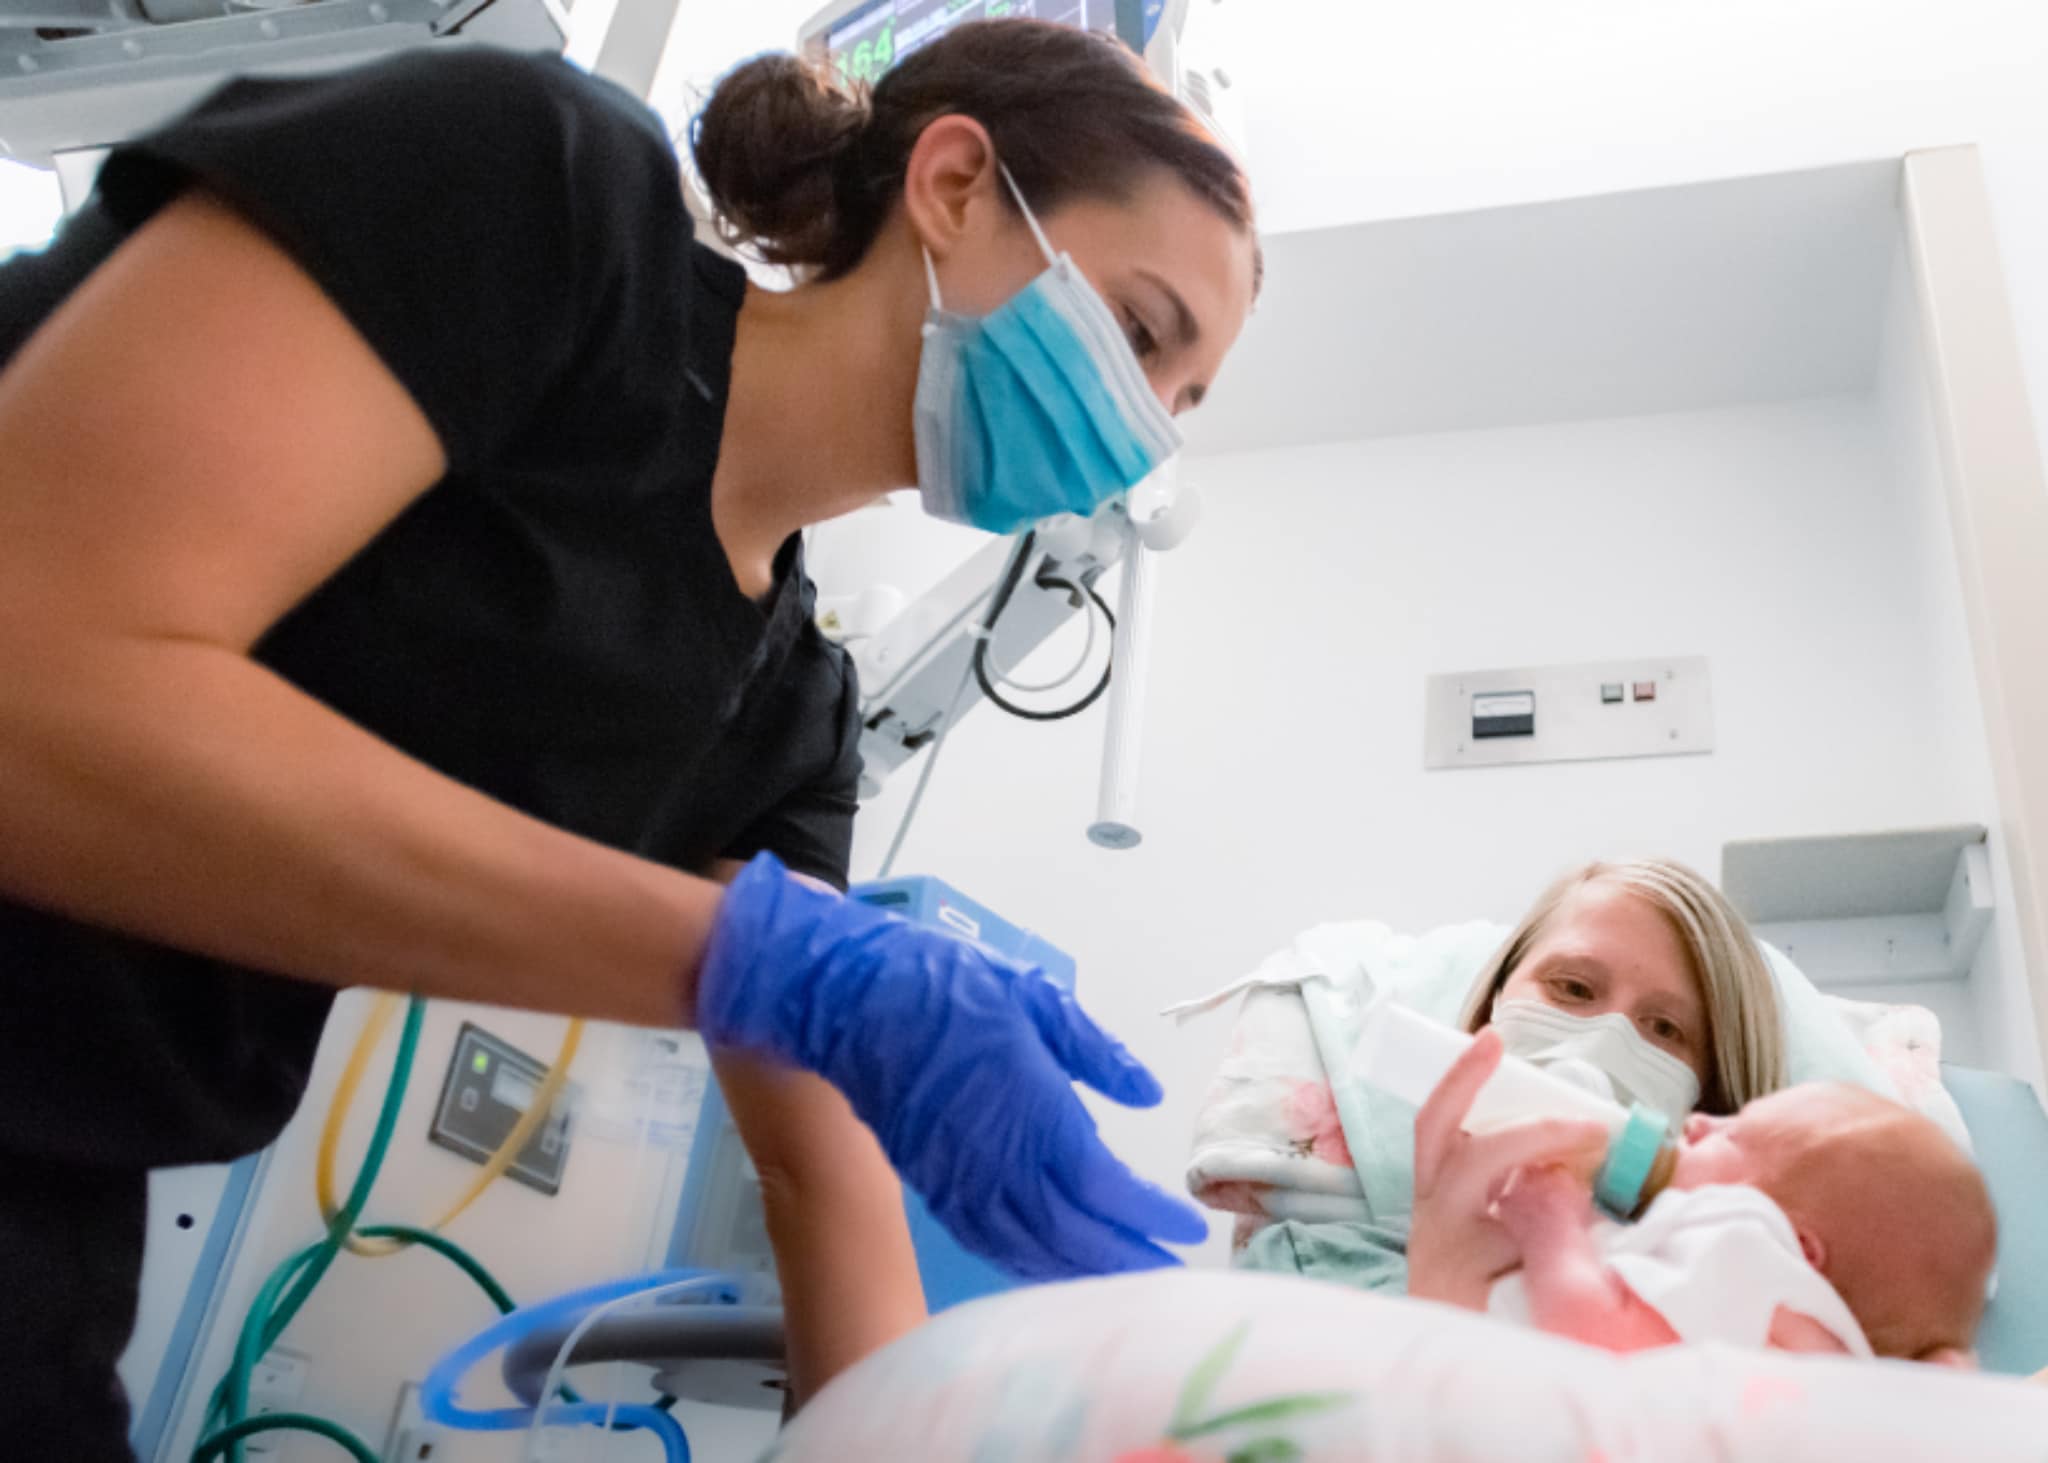 ECU Health nurse Rhianon Brock assists a mother while she feeds her newborn baby.